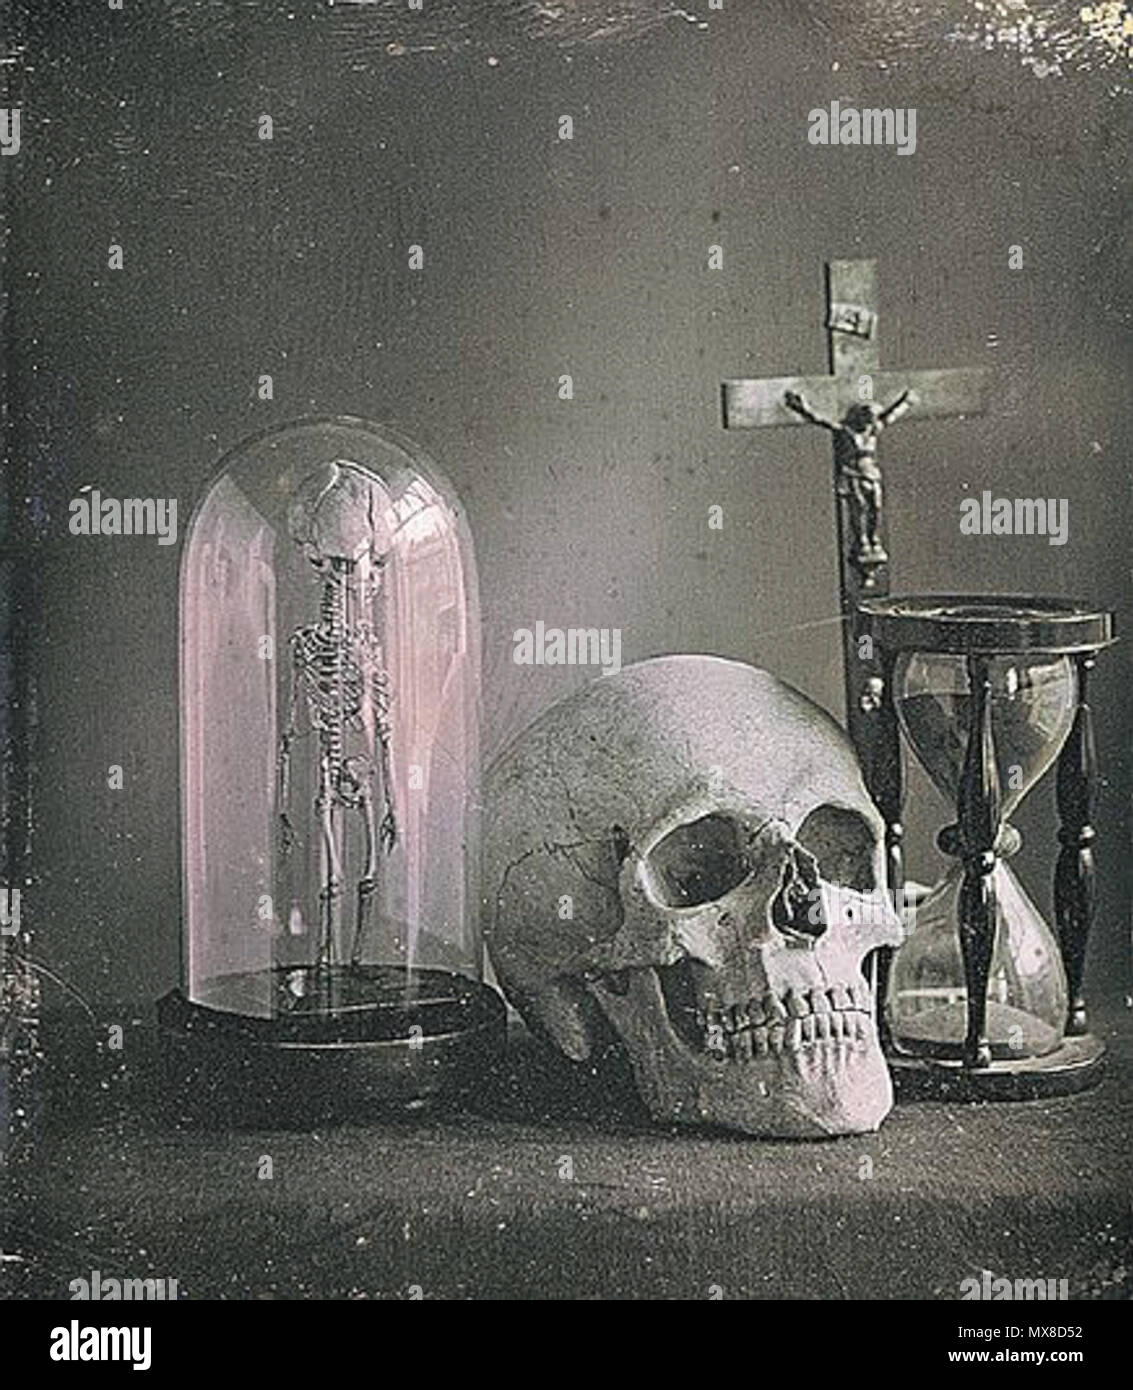 . English: Photograph - 'Still life with skull', by Louis Jules Duboscq (1817-1886). See the collection at the George Eastman House for a copy . ca. 1850. Jules Duboscq 172 Duboscq Jules Still life with skull Stock Photo